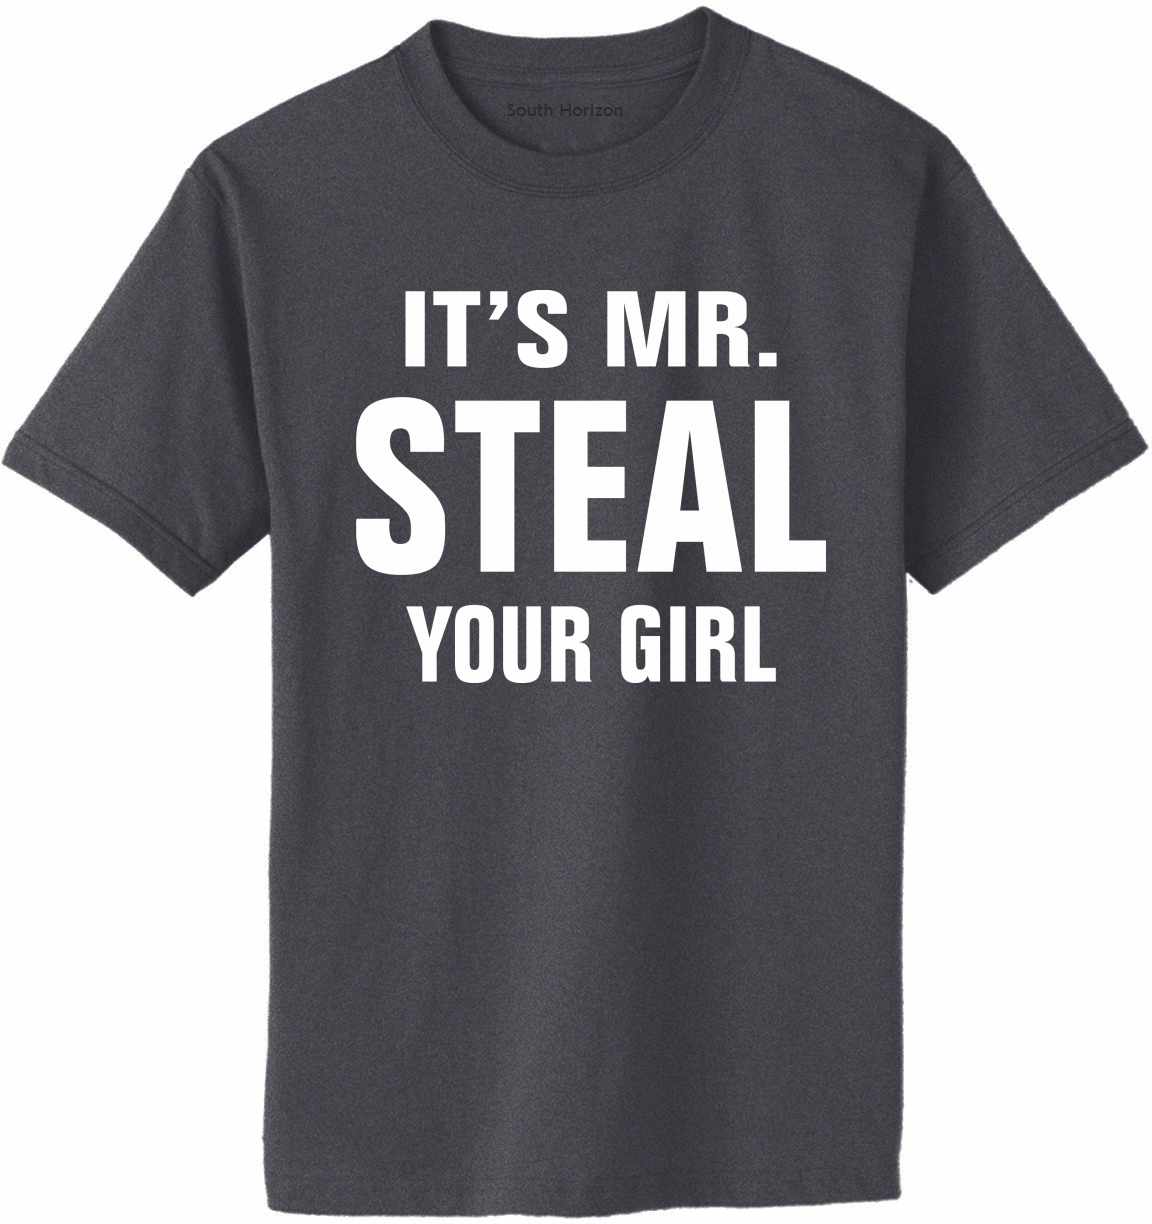 IT'S MR. STEAL YOUR GIRL Adult T-Shirt (#906-1)